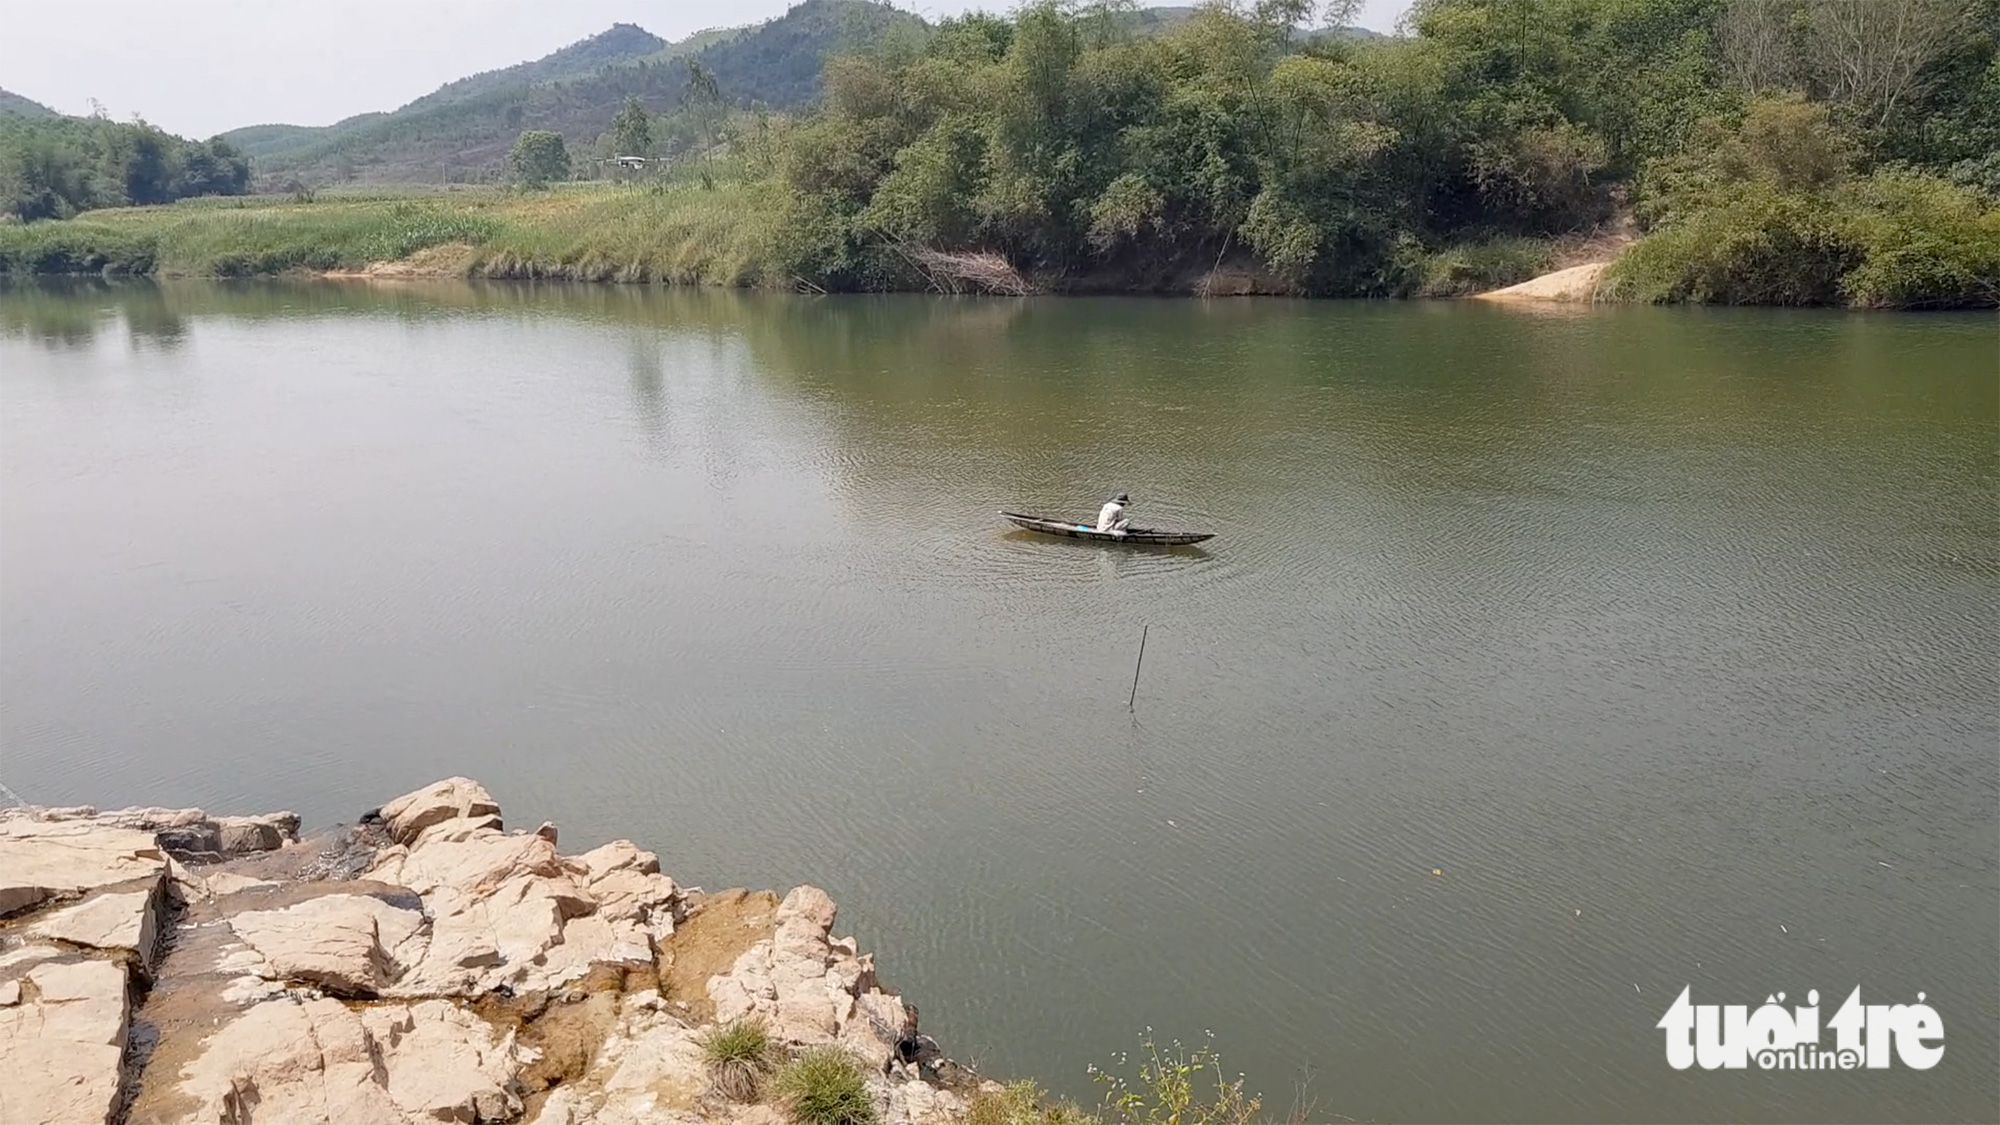 Locals catch fish in the Ky Lo River.